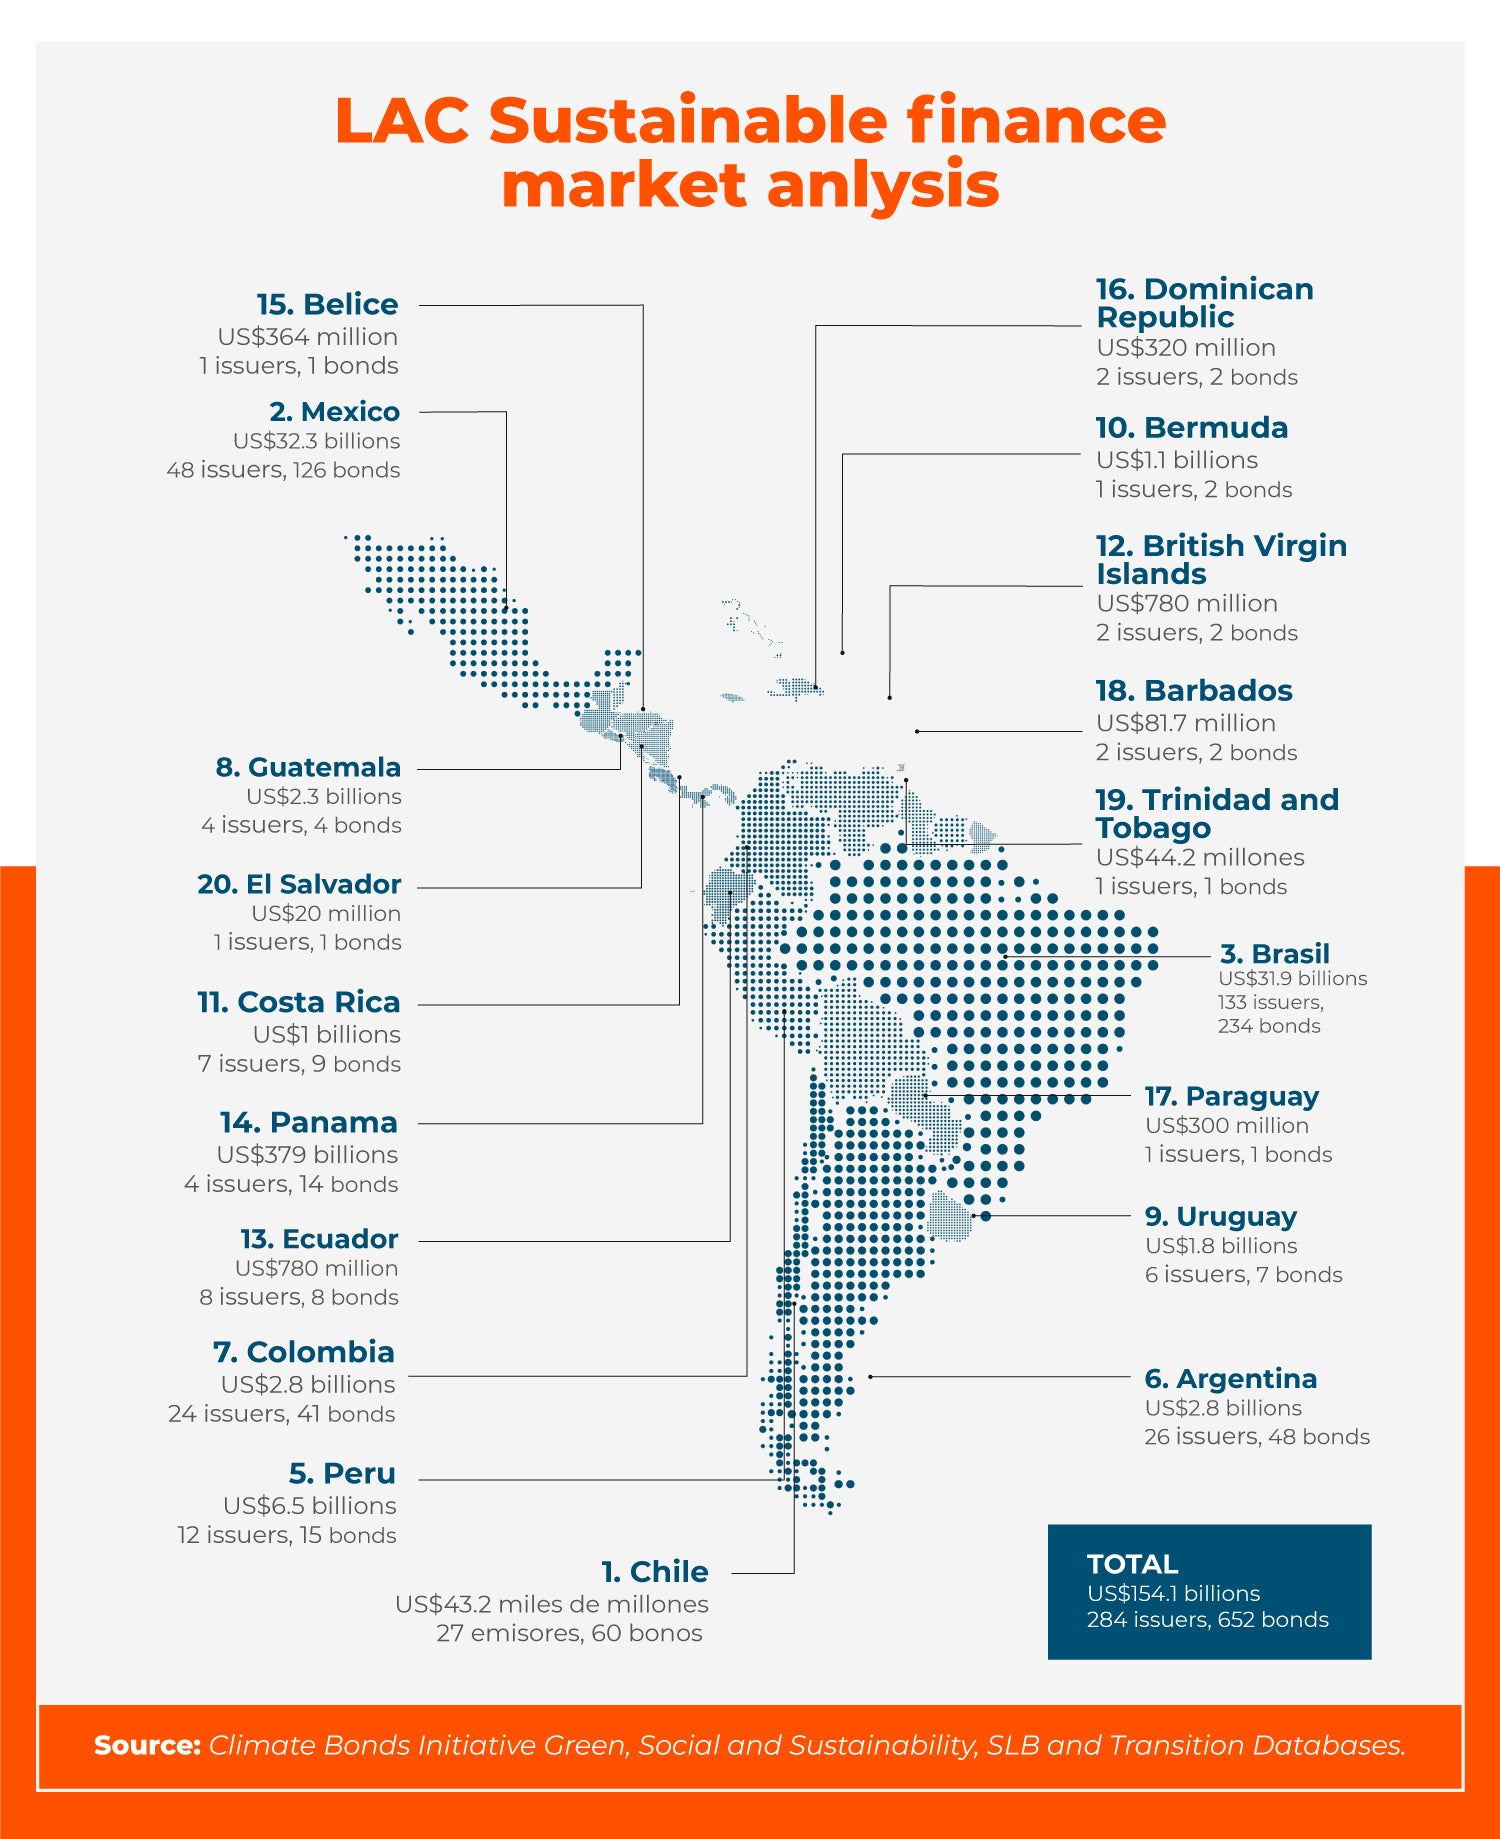 Map showing sustainable bonds markets in LAC